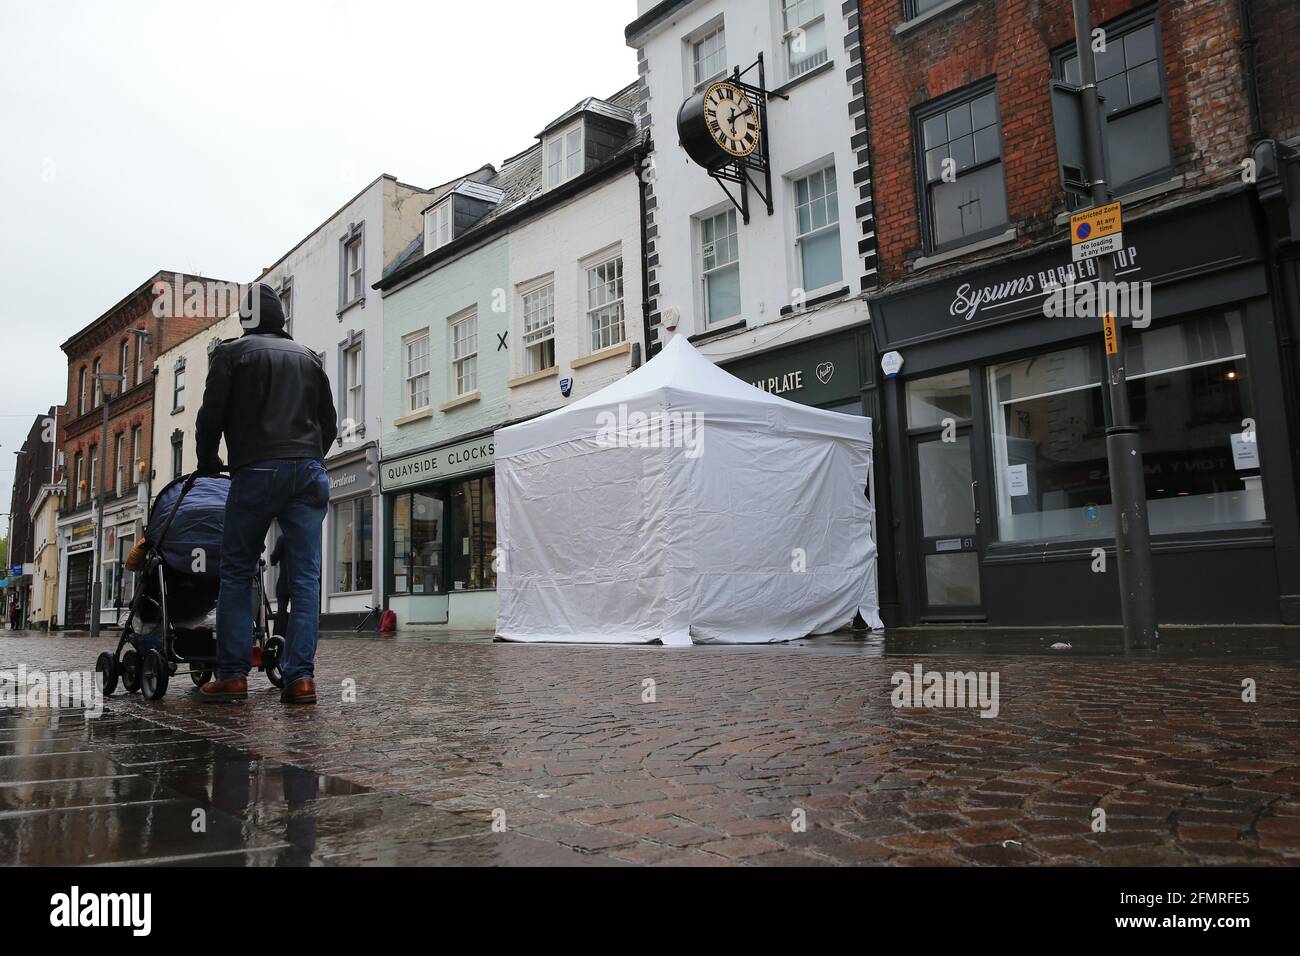 Gloucester, UK, 11th May, 2021. Police have been searching for a body at the The Clean Plate cafe feared to be linked with the serial killer Fred West. Gloucestershire.Credit: Gary Learmonth / Alamy Live News Stock Photo